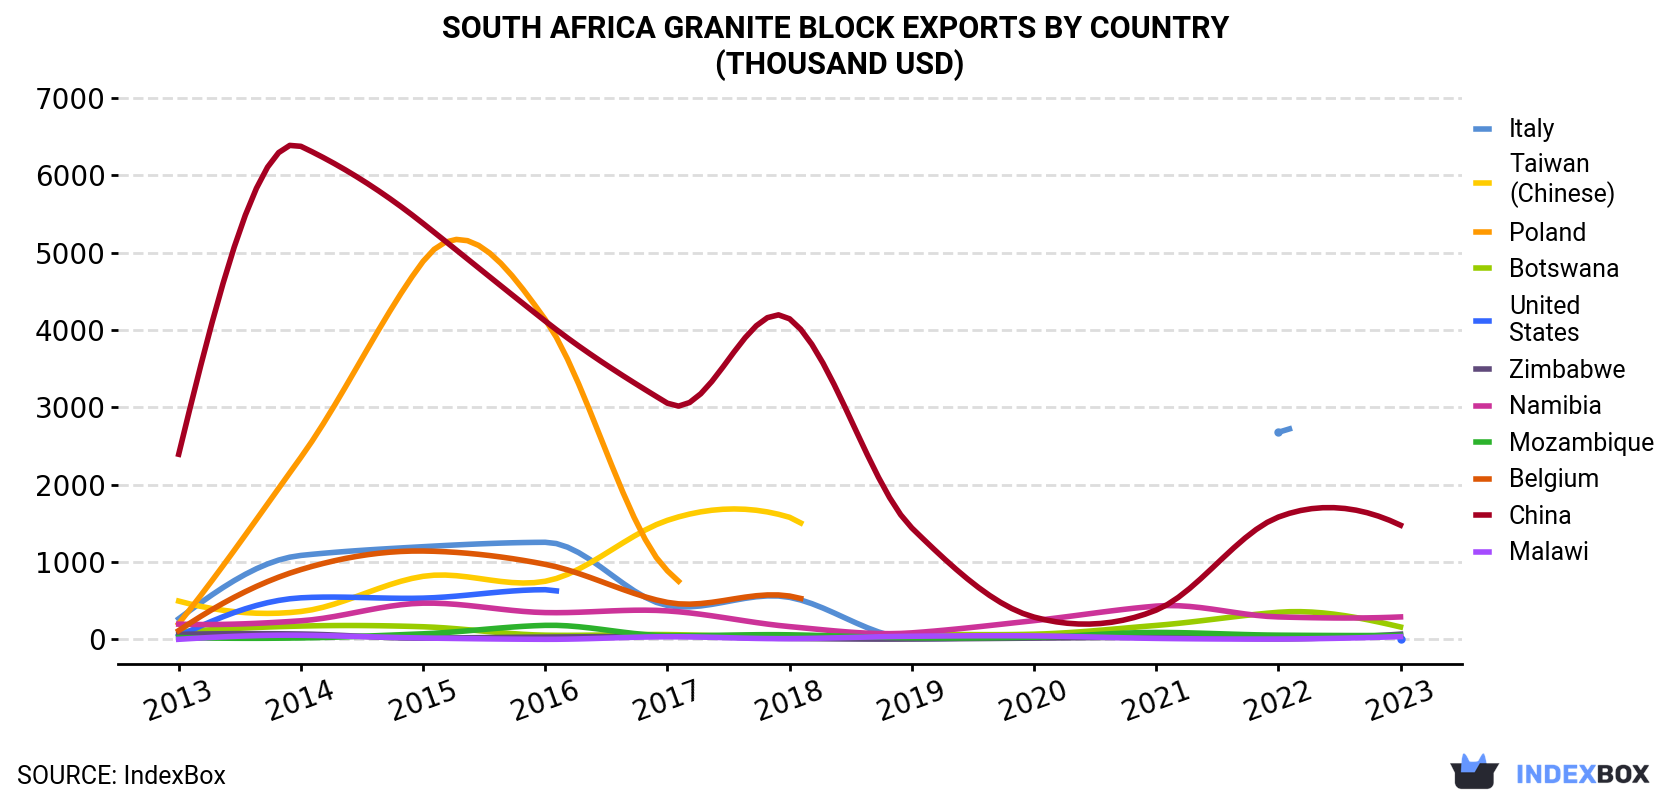 South Africa Granite Block Exports By Country (Thousand USD)